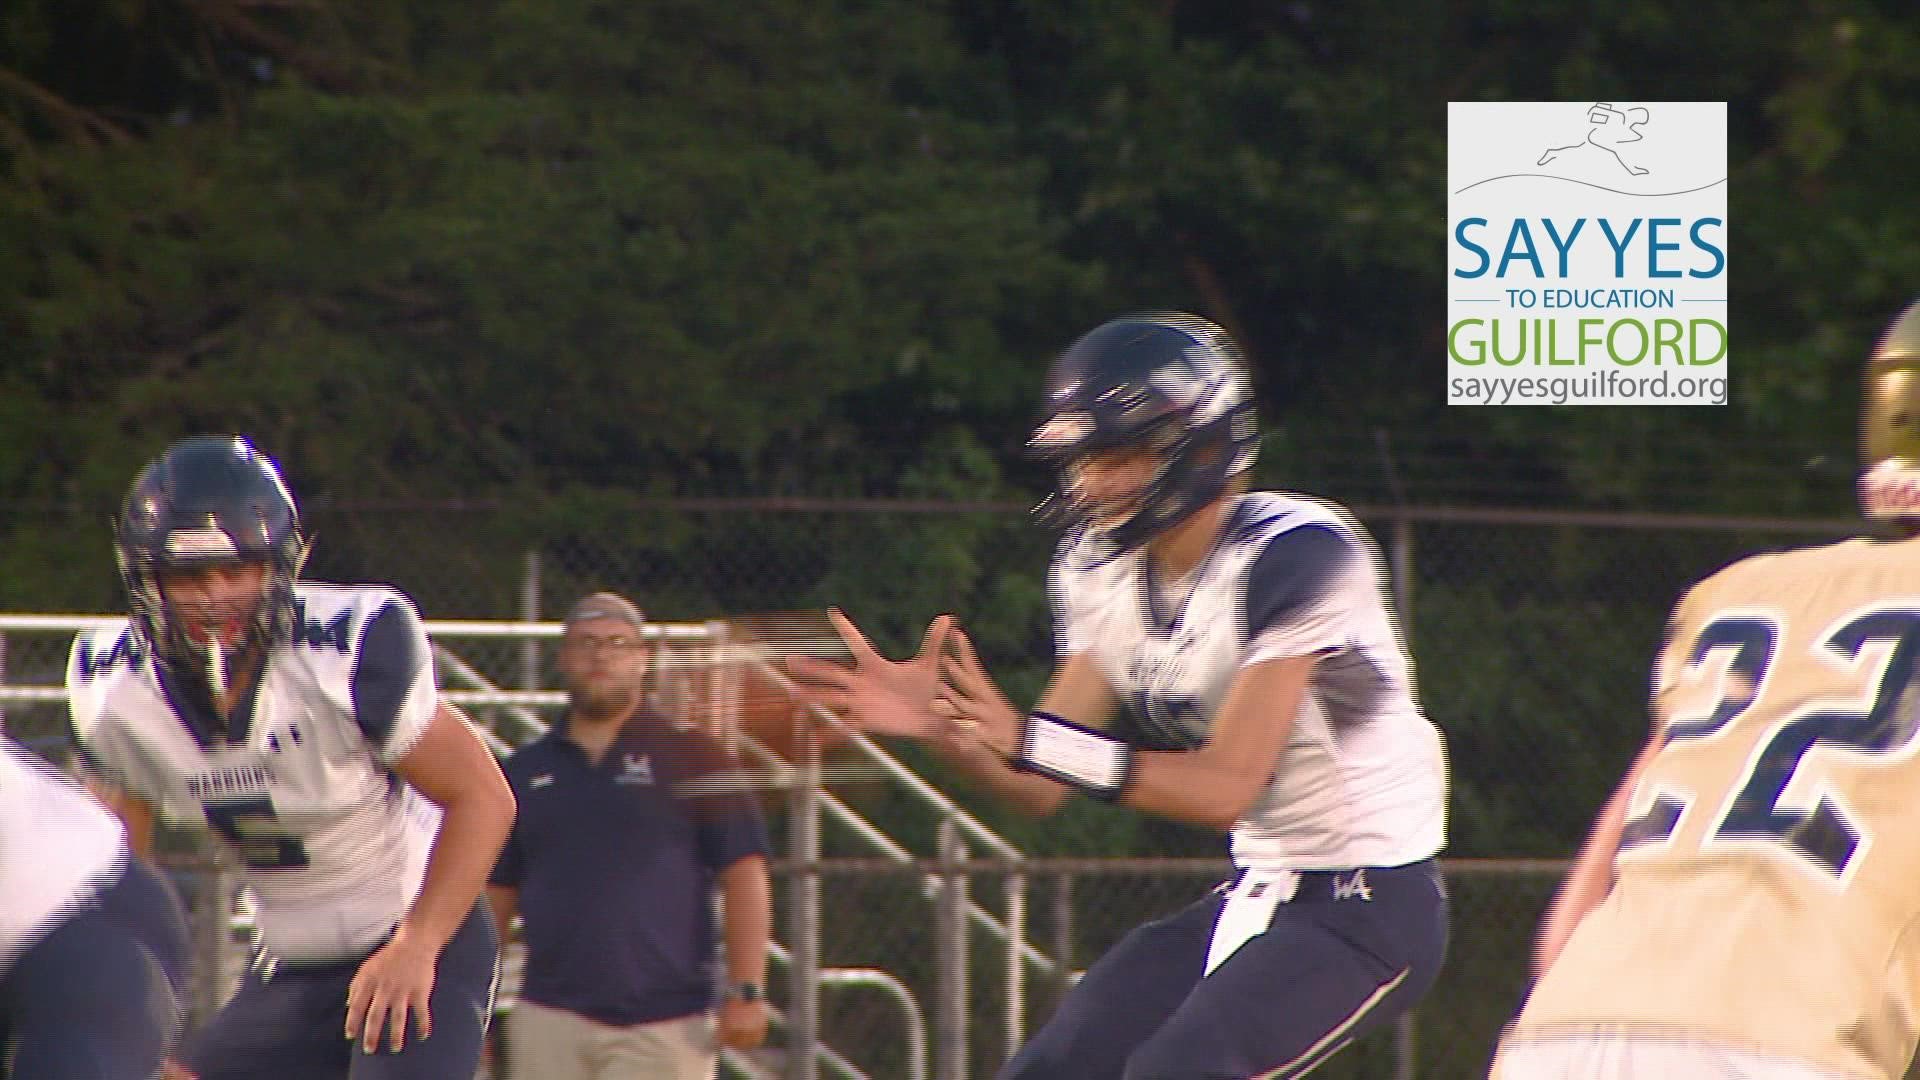 Western Alamance WR Kaden Wilborn makes a great catch for the TD to claim Week One honors.